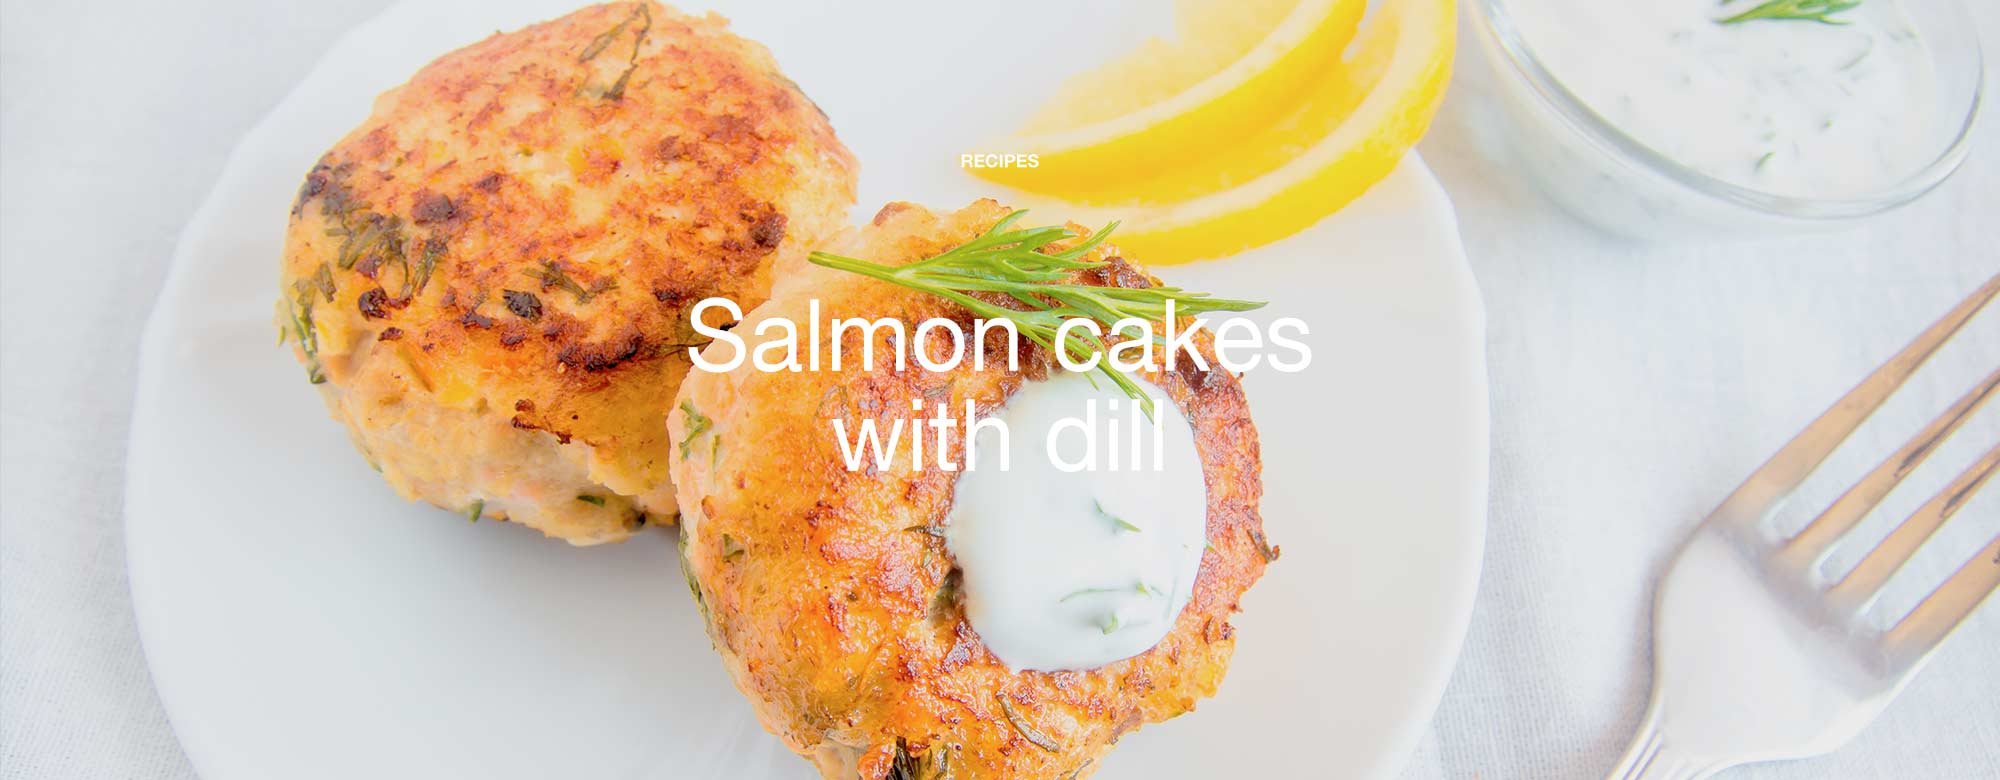 Salmon cakes with dill